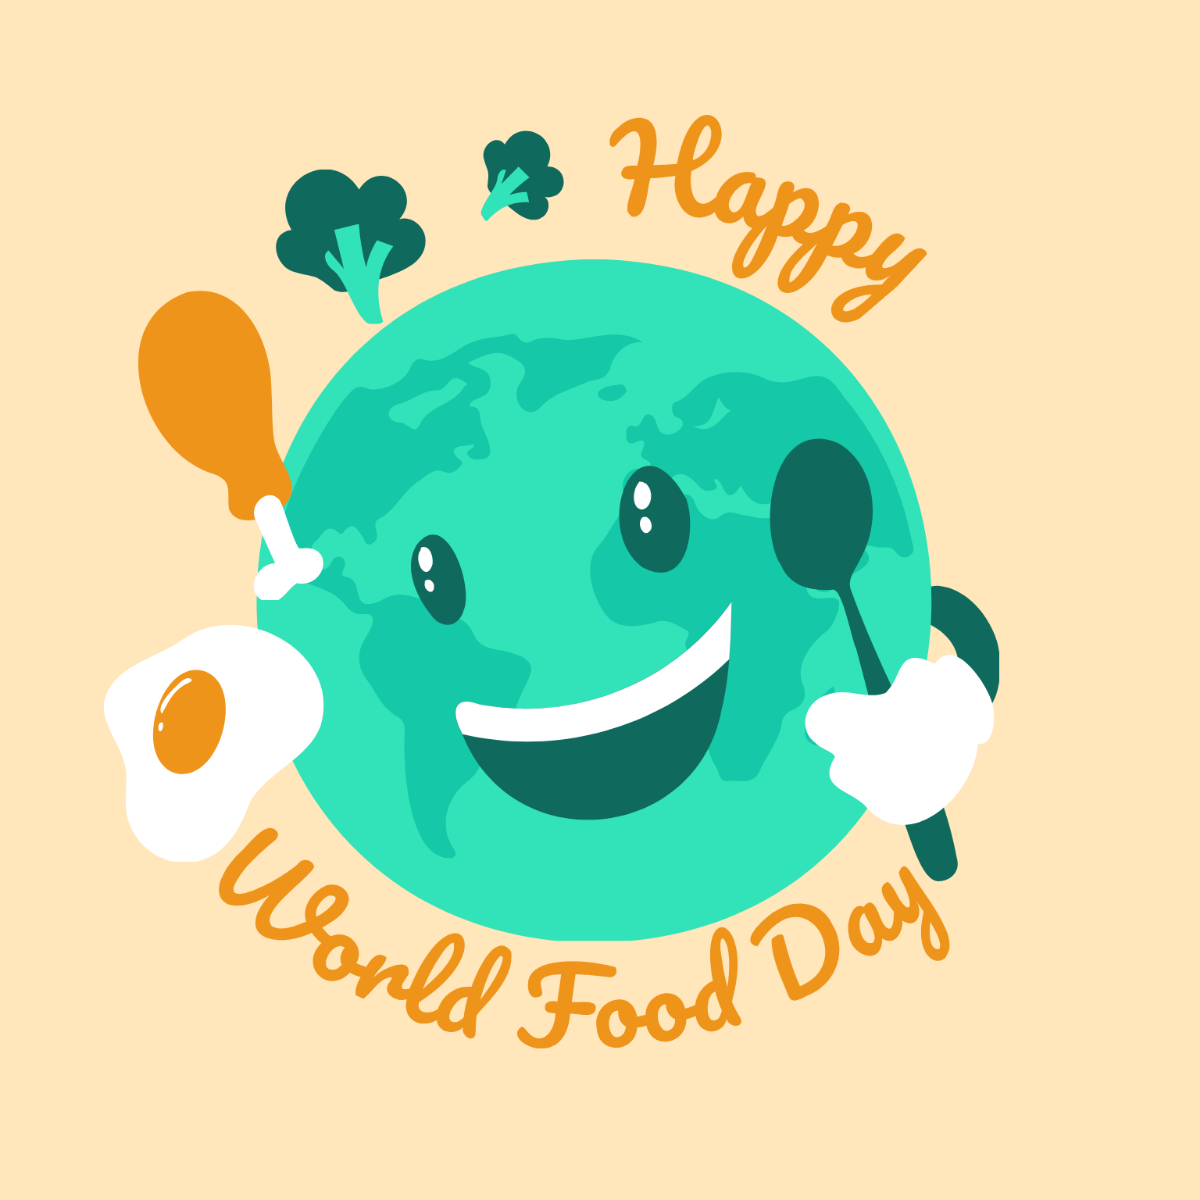 Happy World Food Day Illustration Template